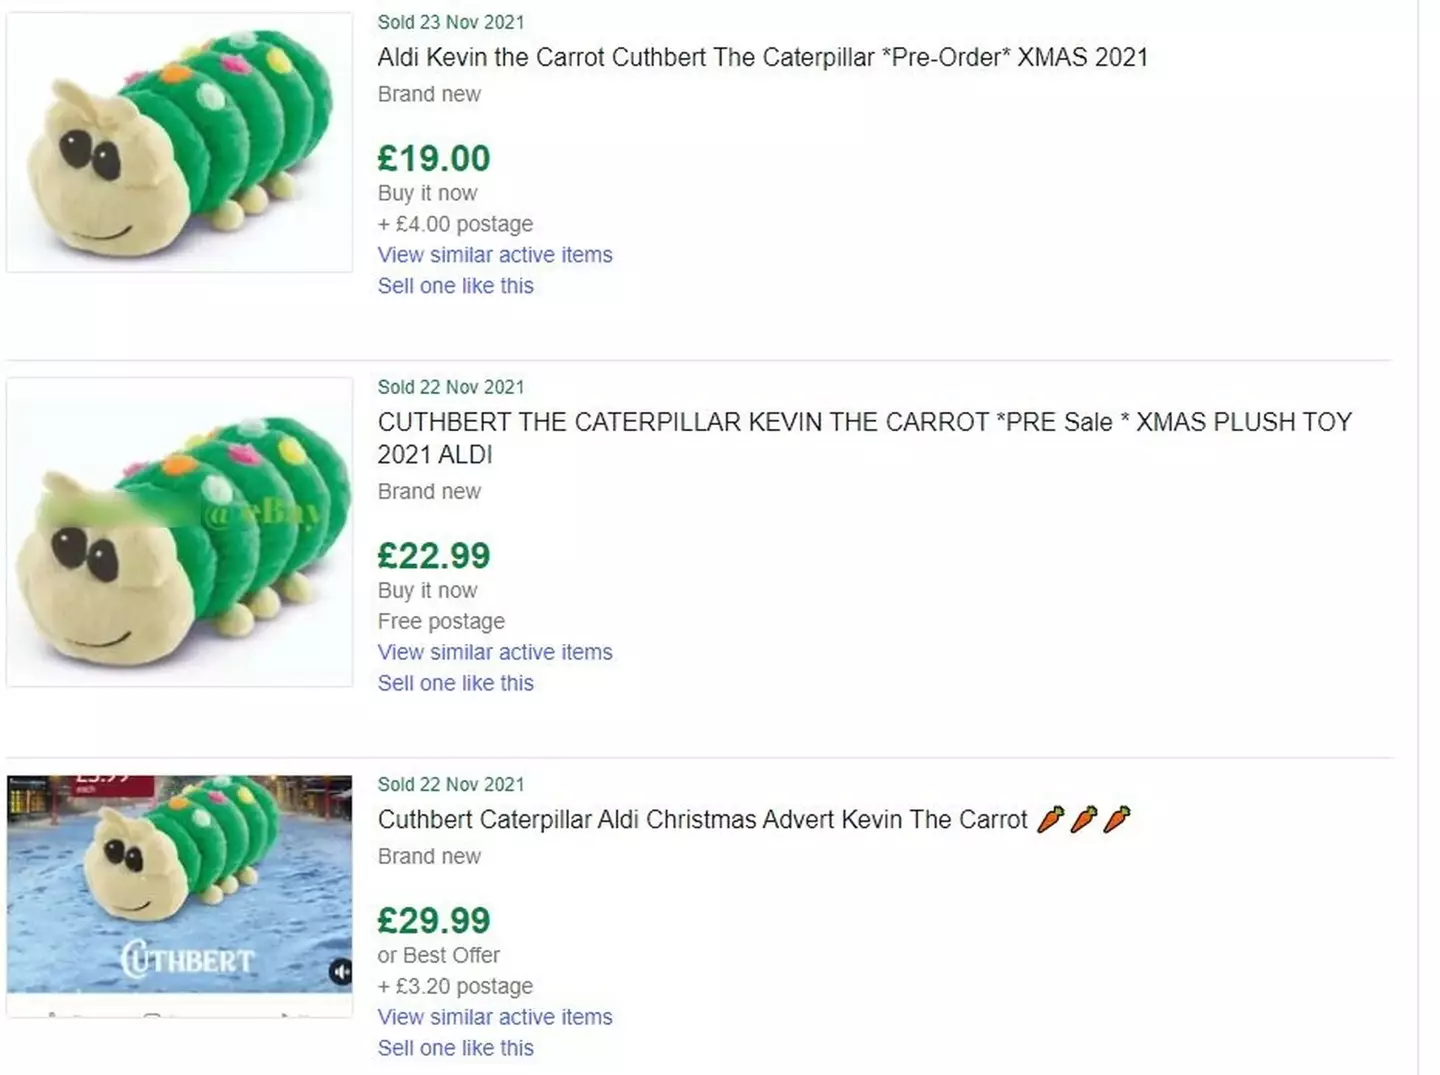 Some toys are going at extortionate prices online (